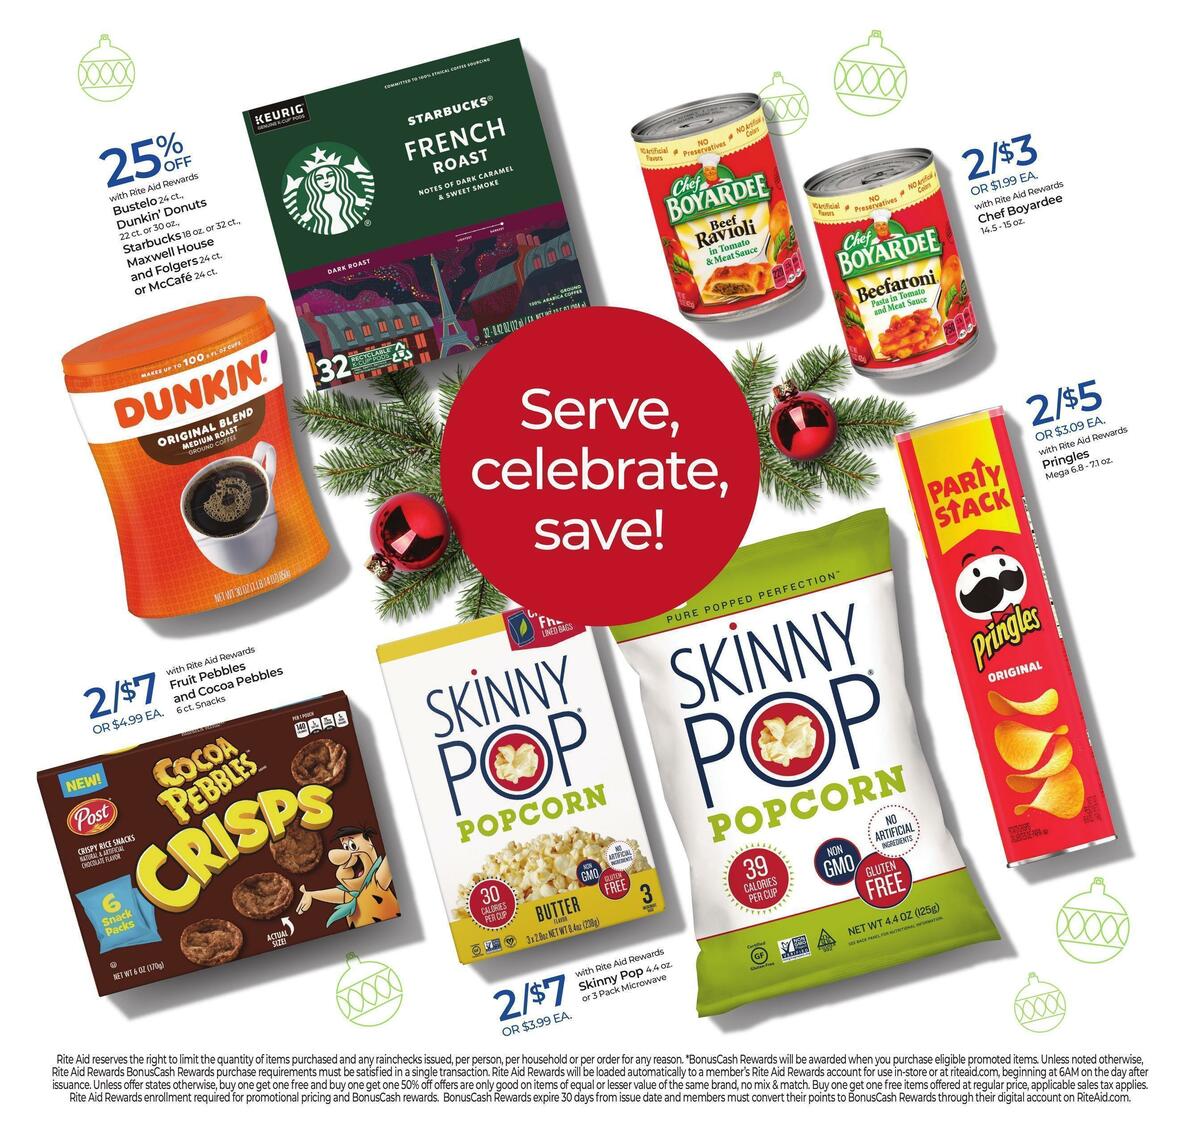 Rite Aid Weekly Ad from December 11